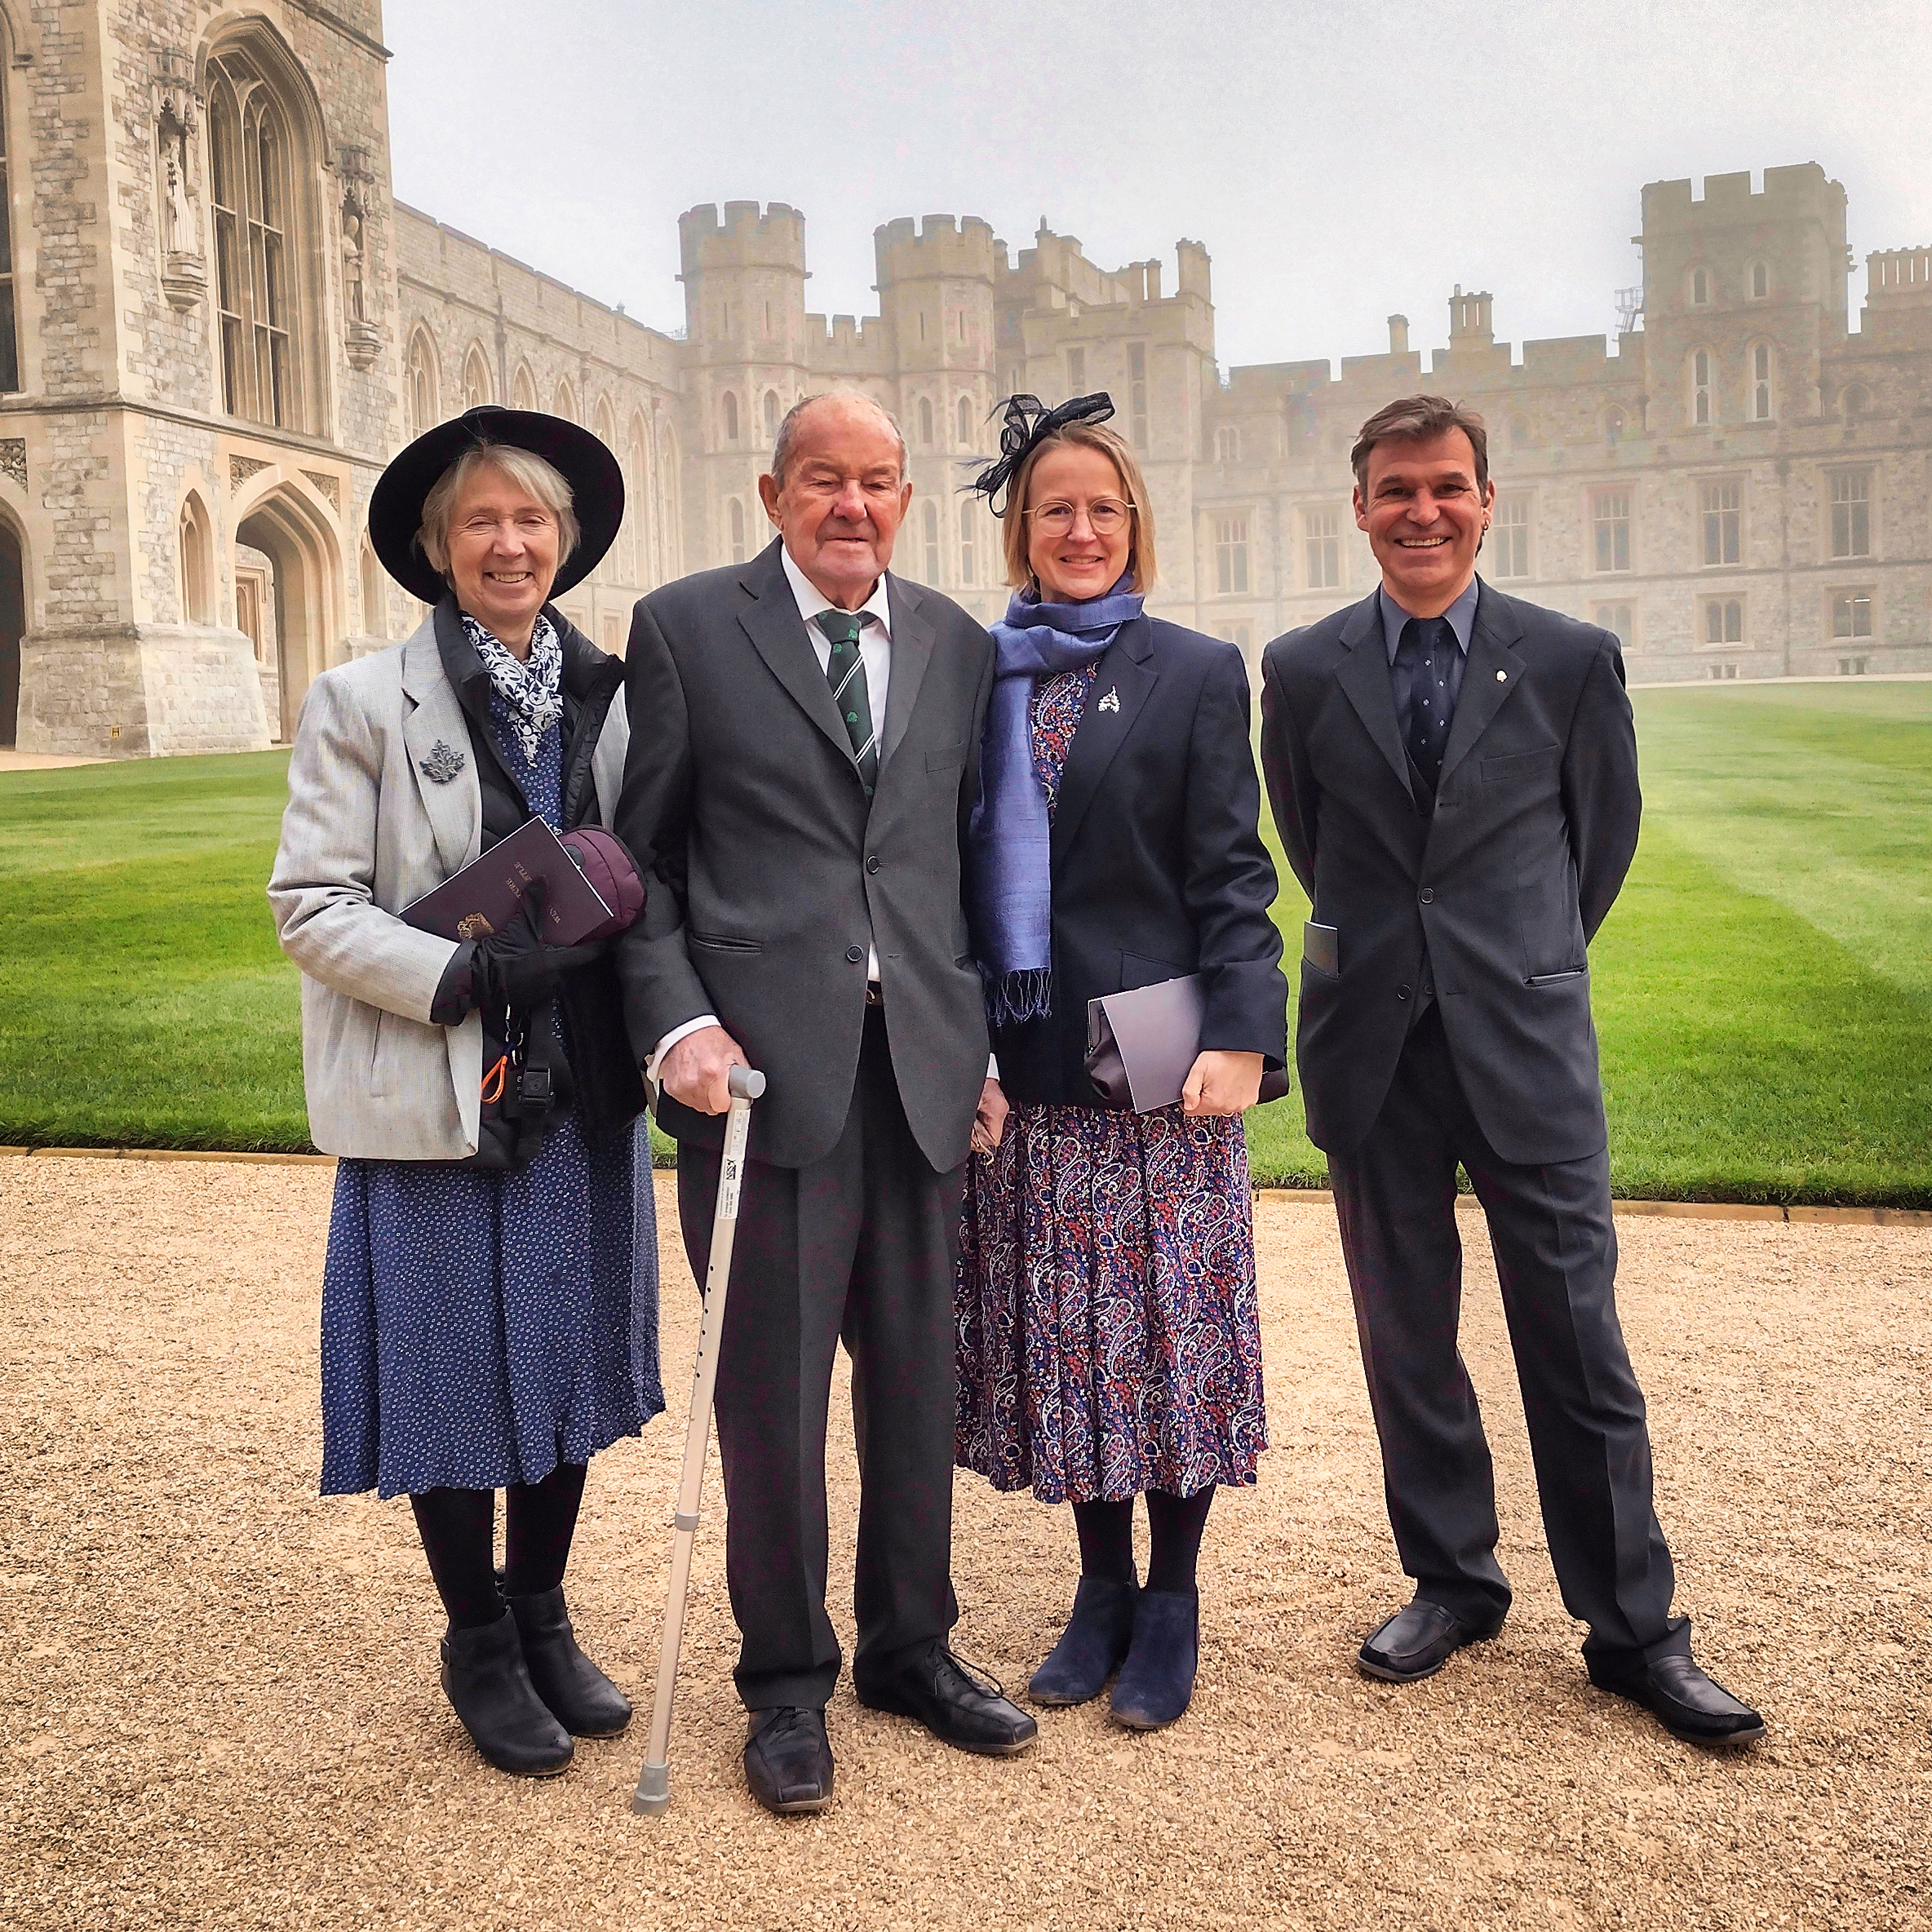 Left to right: Jill Butler, Ted Green MVO MBE, Sarah Bryce and Julian Hight.